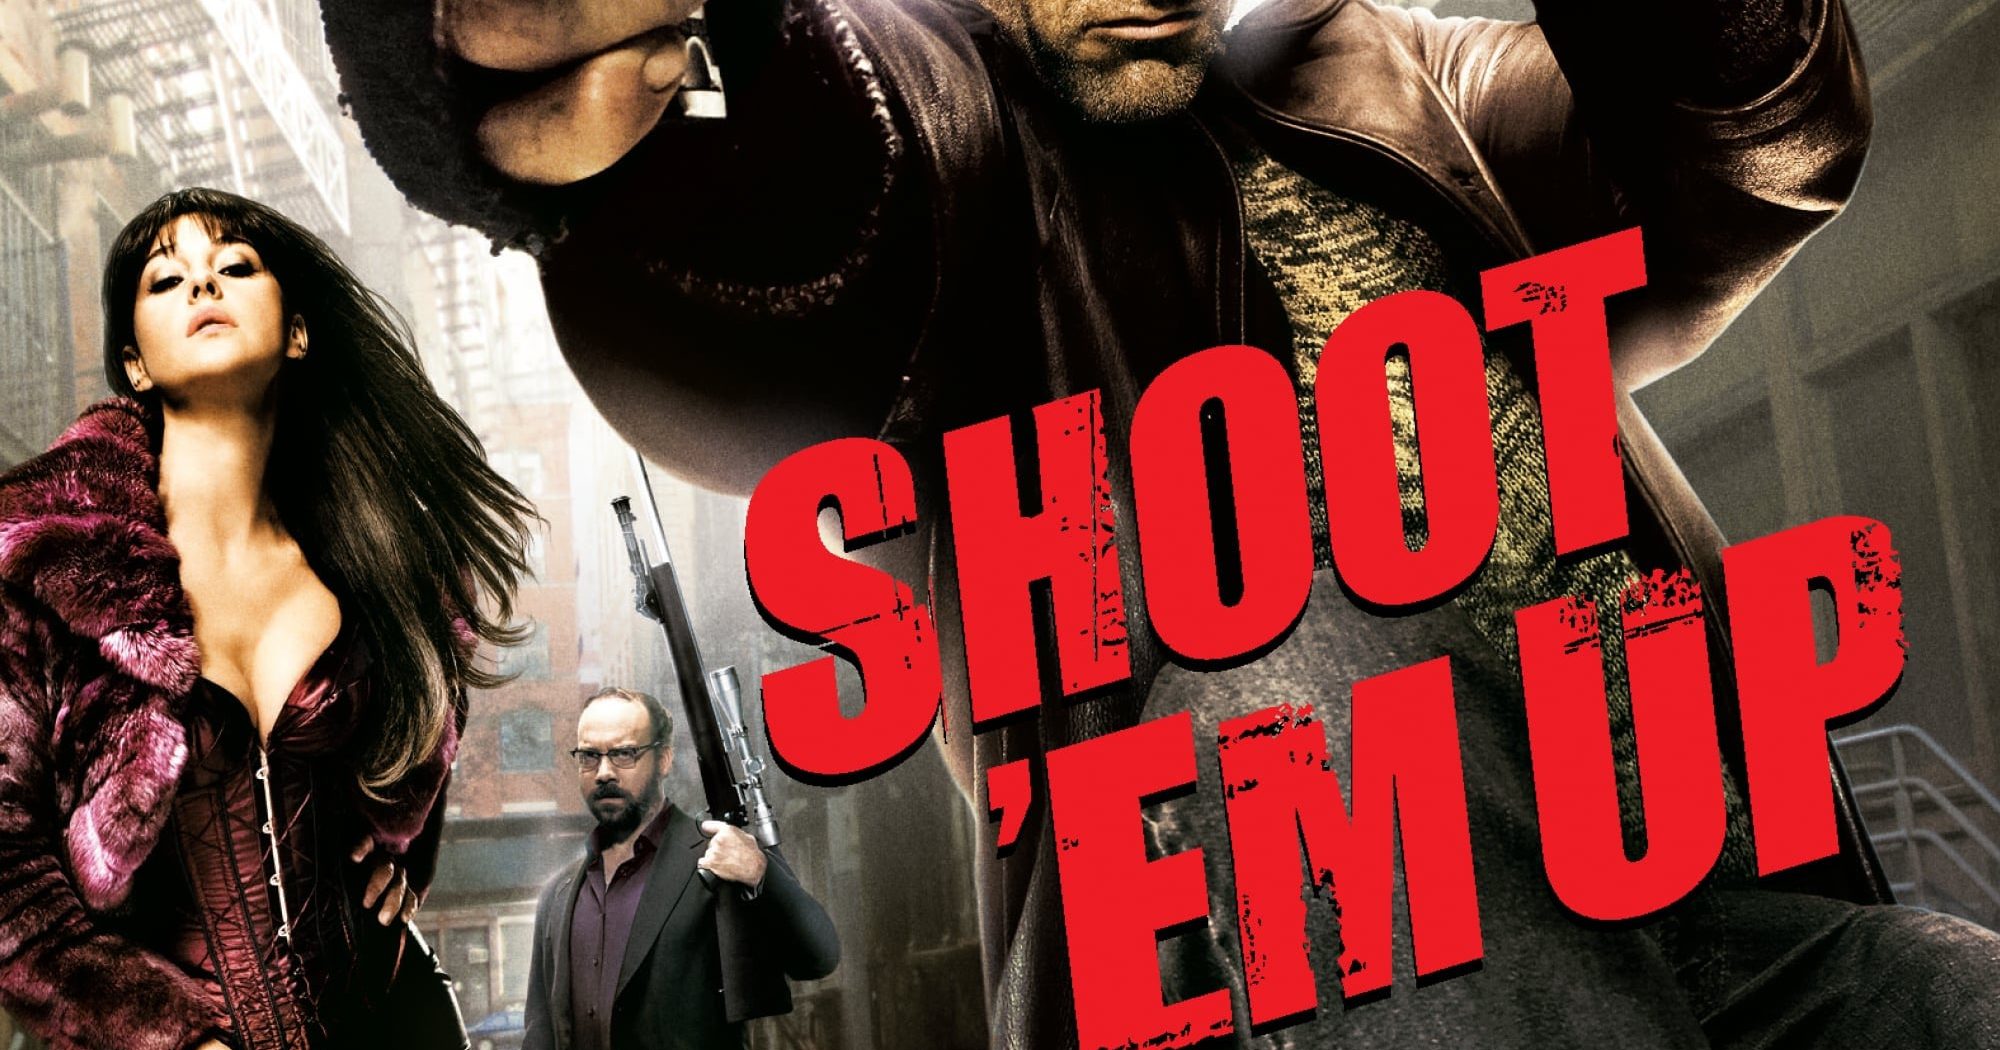 Poster for the movie "Shoot 'Em Up"